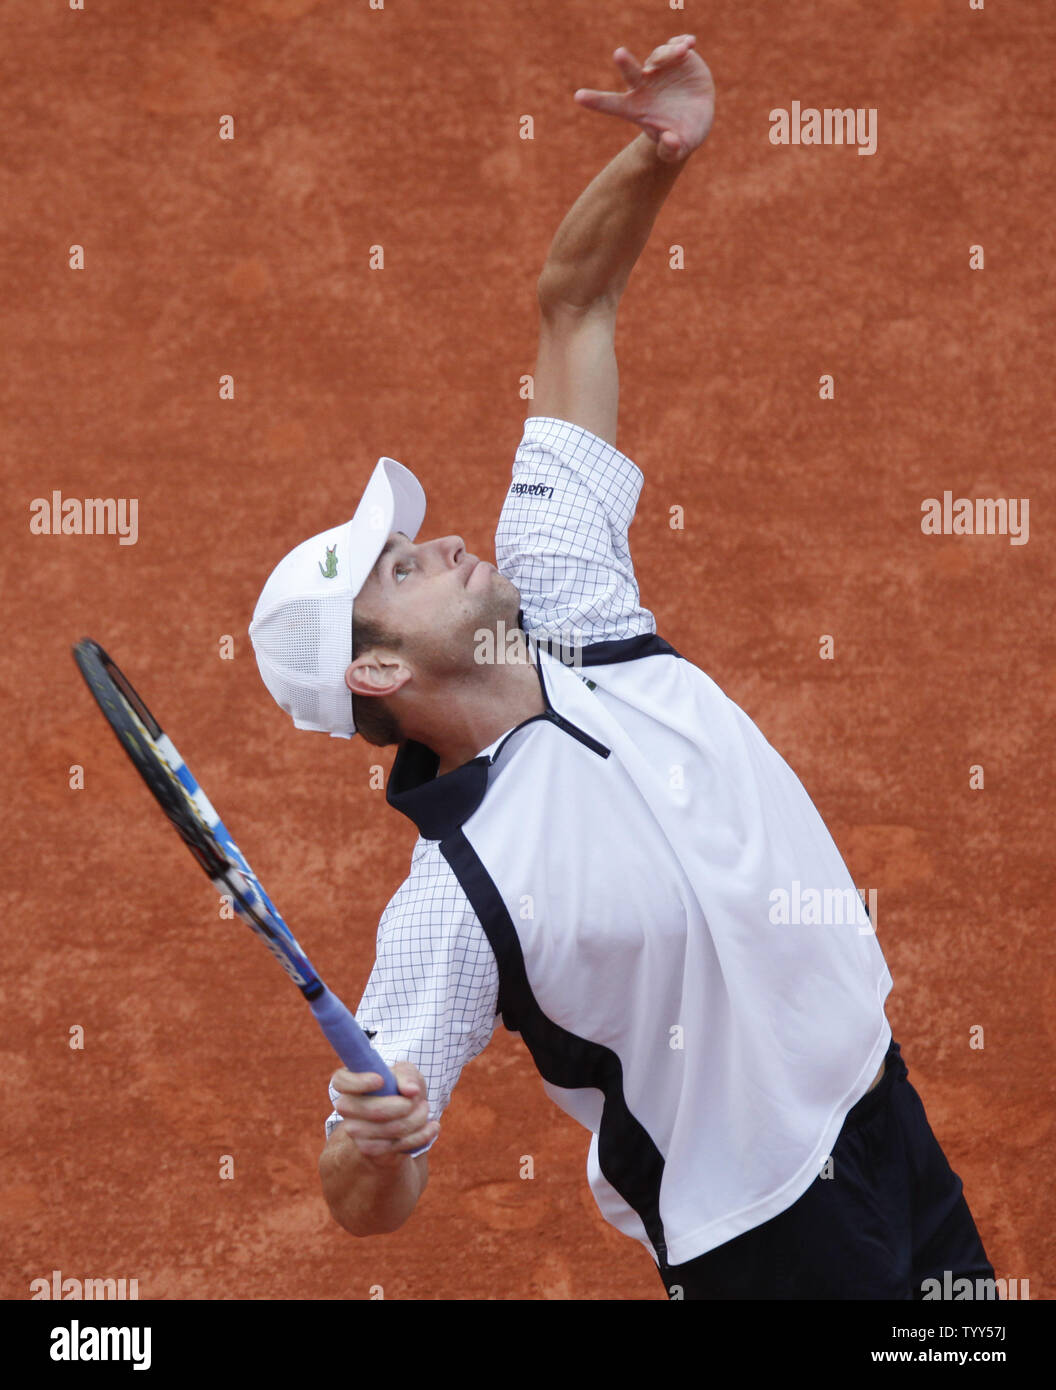 American Andy Roddick prepares a serve during his French Open fourth-round match against Frenchman Gael Monfils at Roland Garros in Paris on June 1, 2009.  Monfils defeated Roddick 6-4, 6-2, 6-3.   (UPI Photo/ David Silpa) Stock Photo